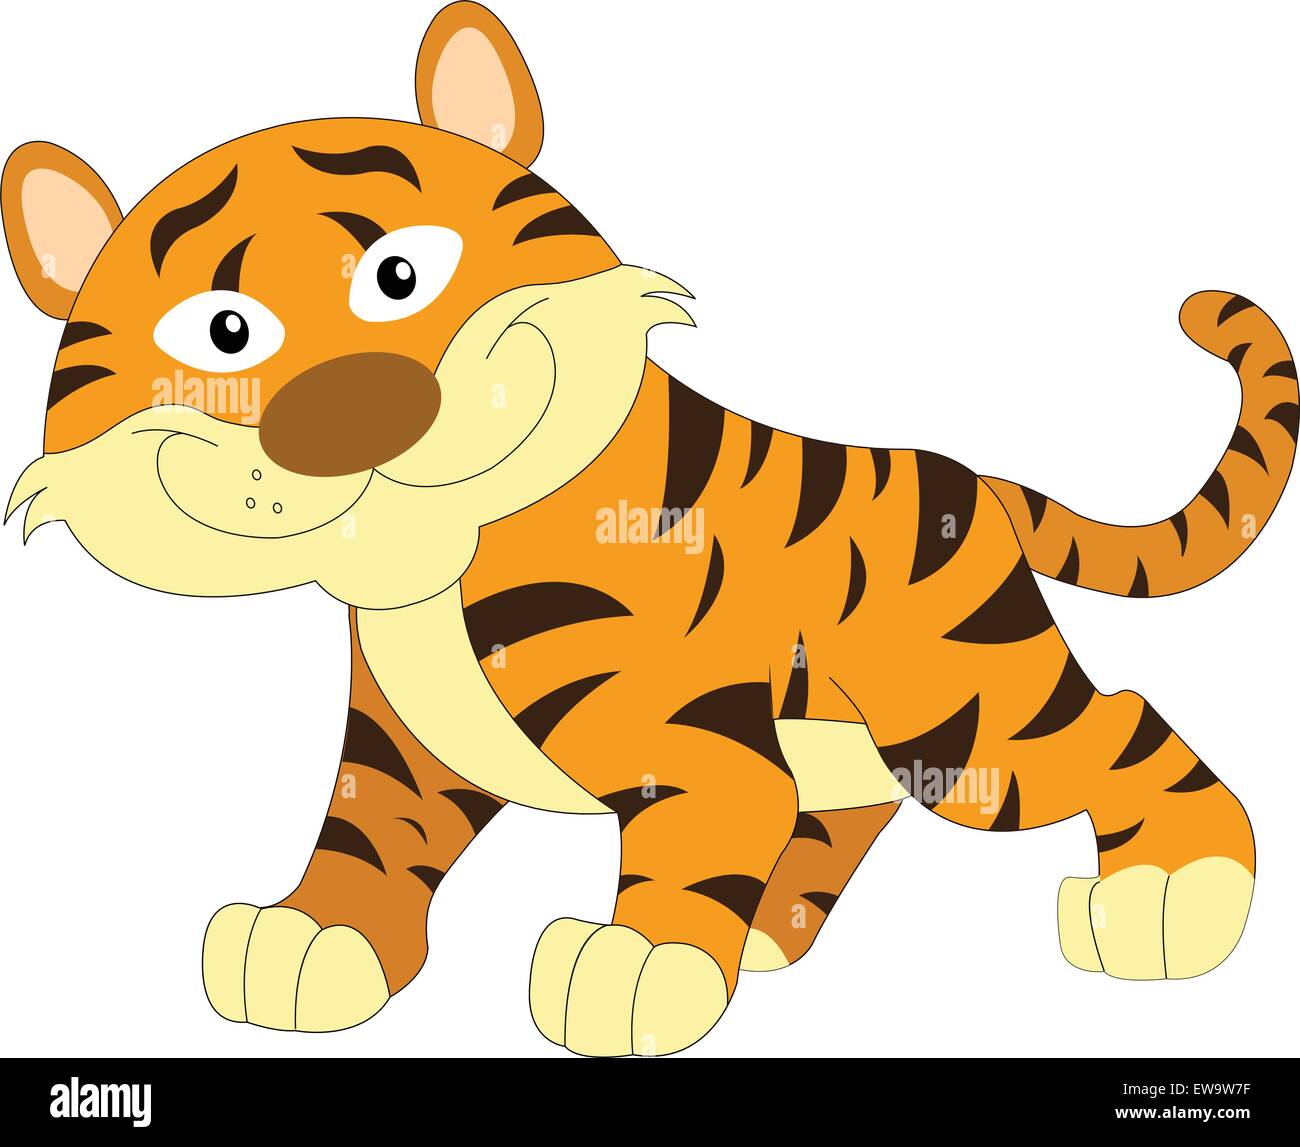 Free Vectors  Brown tiger cat and yellow parakeet icon